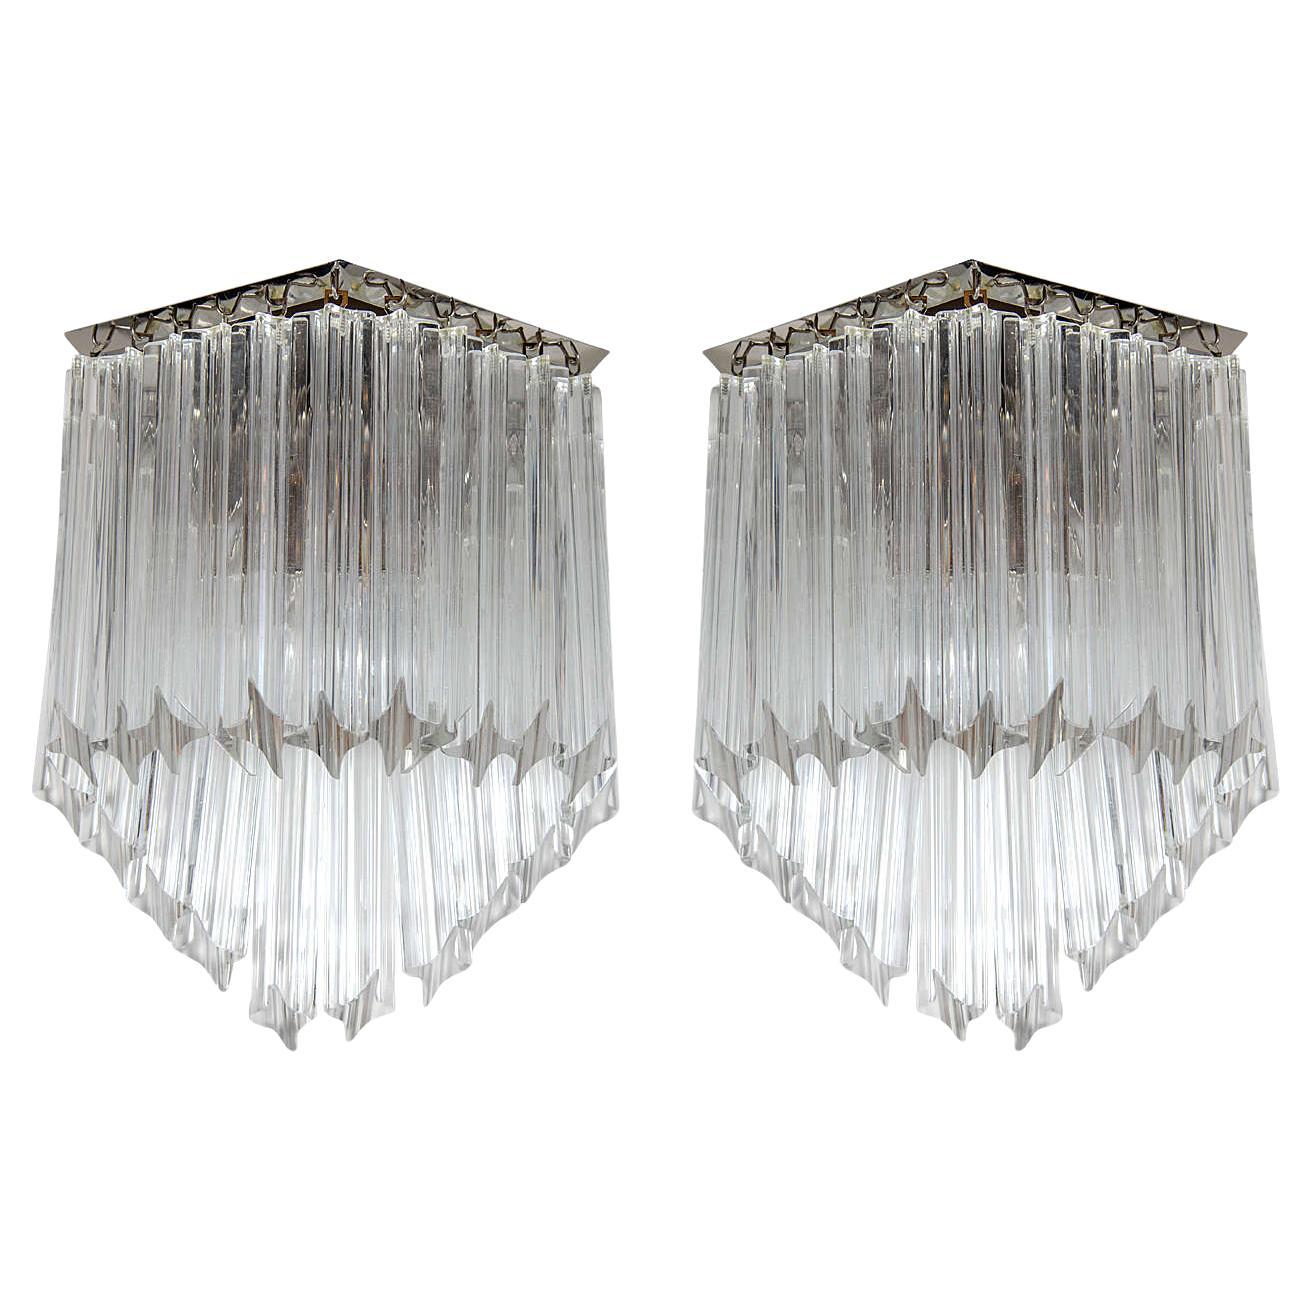 Pair of Mid-Century Modernist Triedre Cut-Crystal Camer Sconces